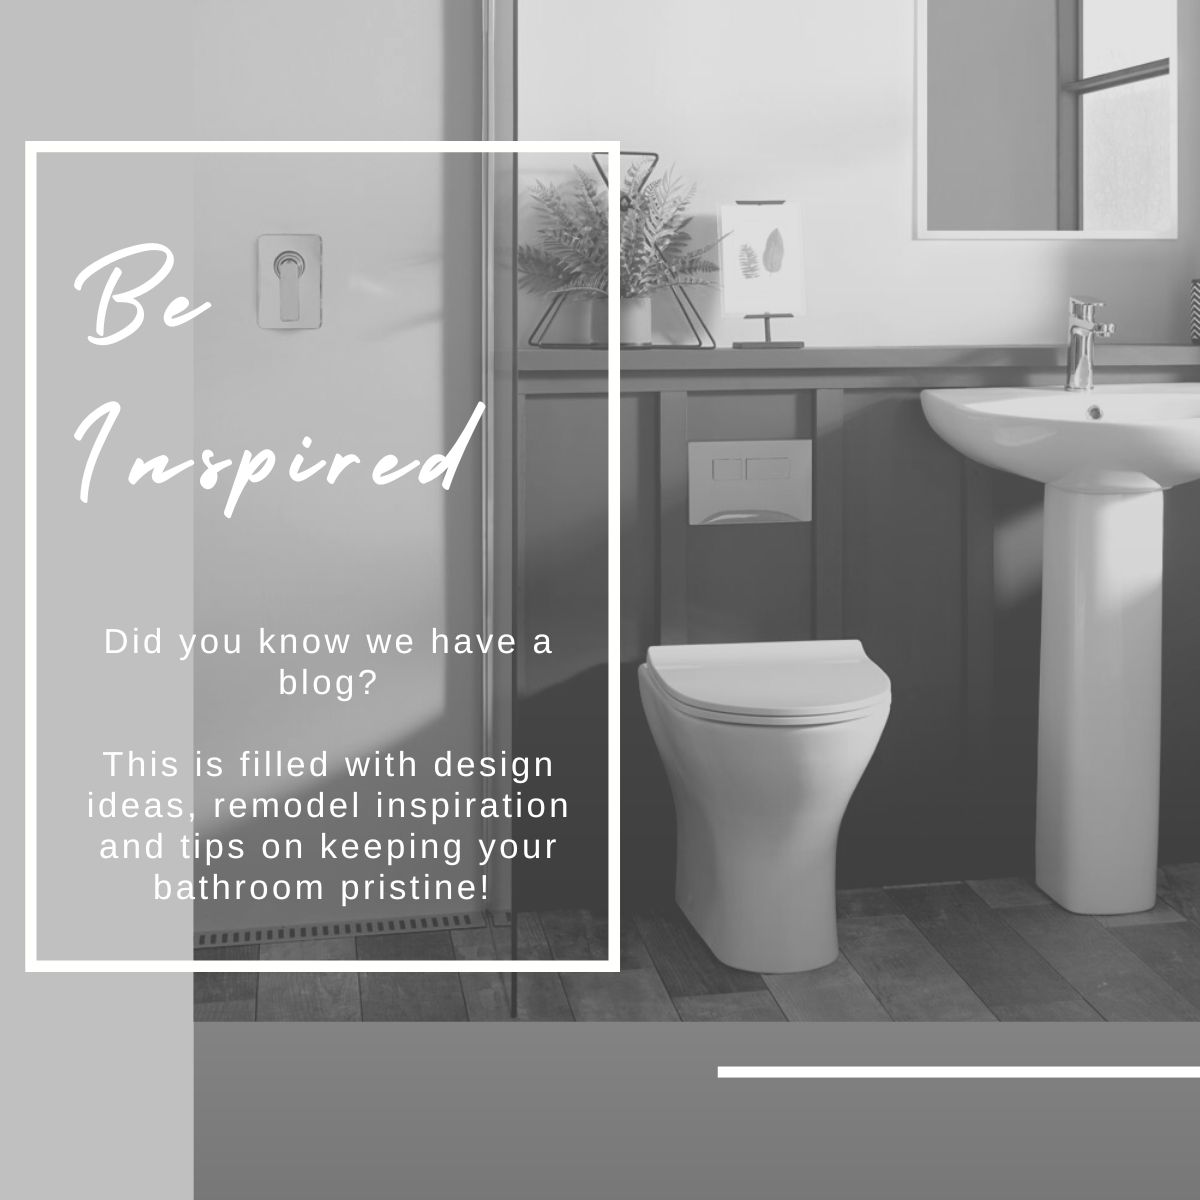 Feeling overwhelmed by your bathroom remodel? We get it! So much to consider. Our blog is full of expert advice to guide you through every step, to choosing fixtures and creating a spa-like atmosphere. Visit our blog to find the inspiration you need to create your dream bathroom!